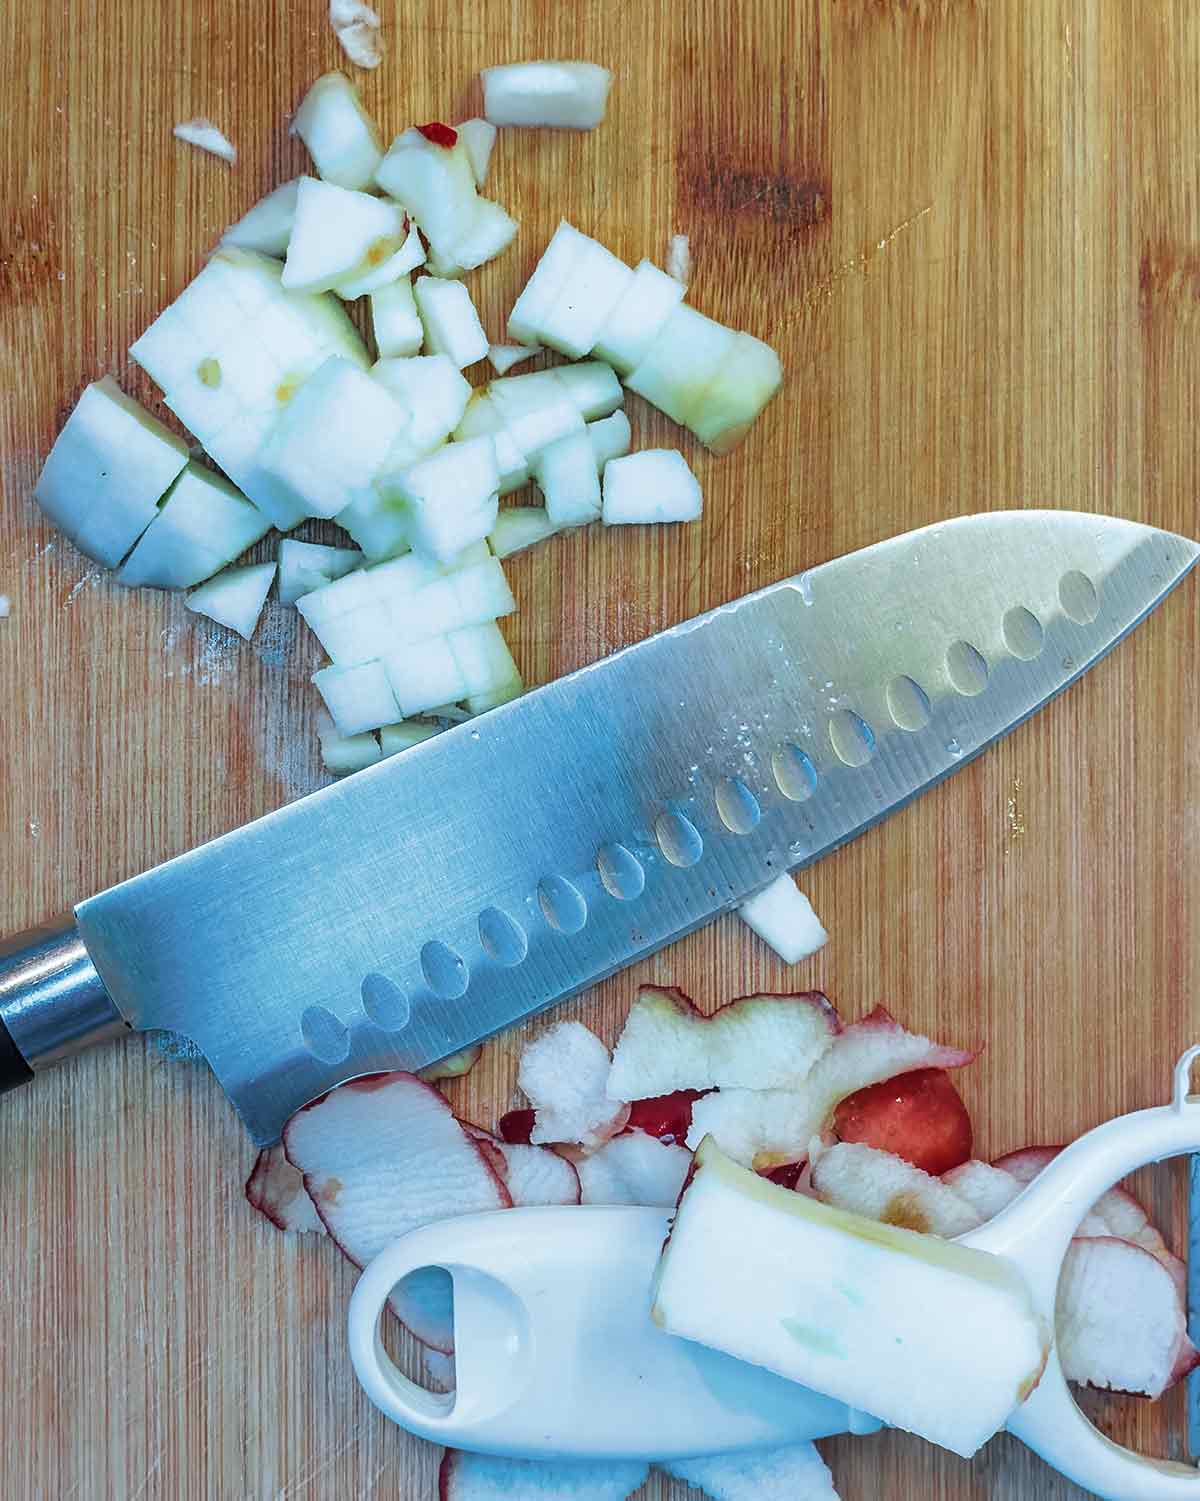 Apples chopped into small cubes on a chopping board.